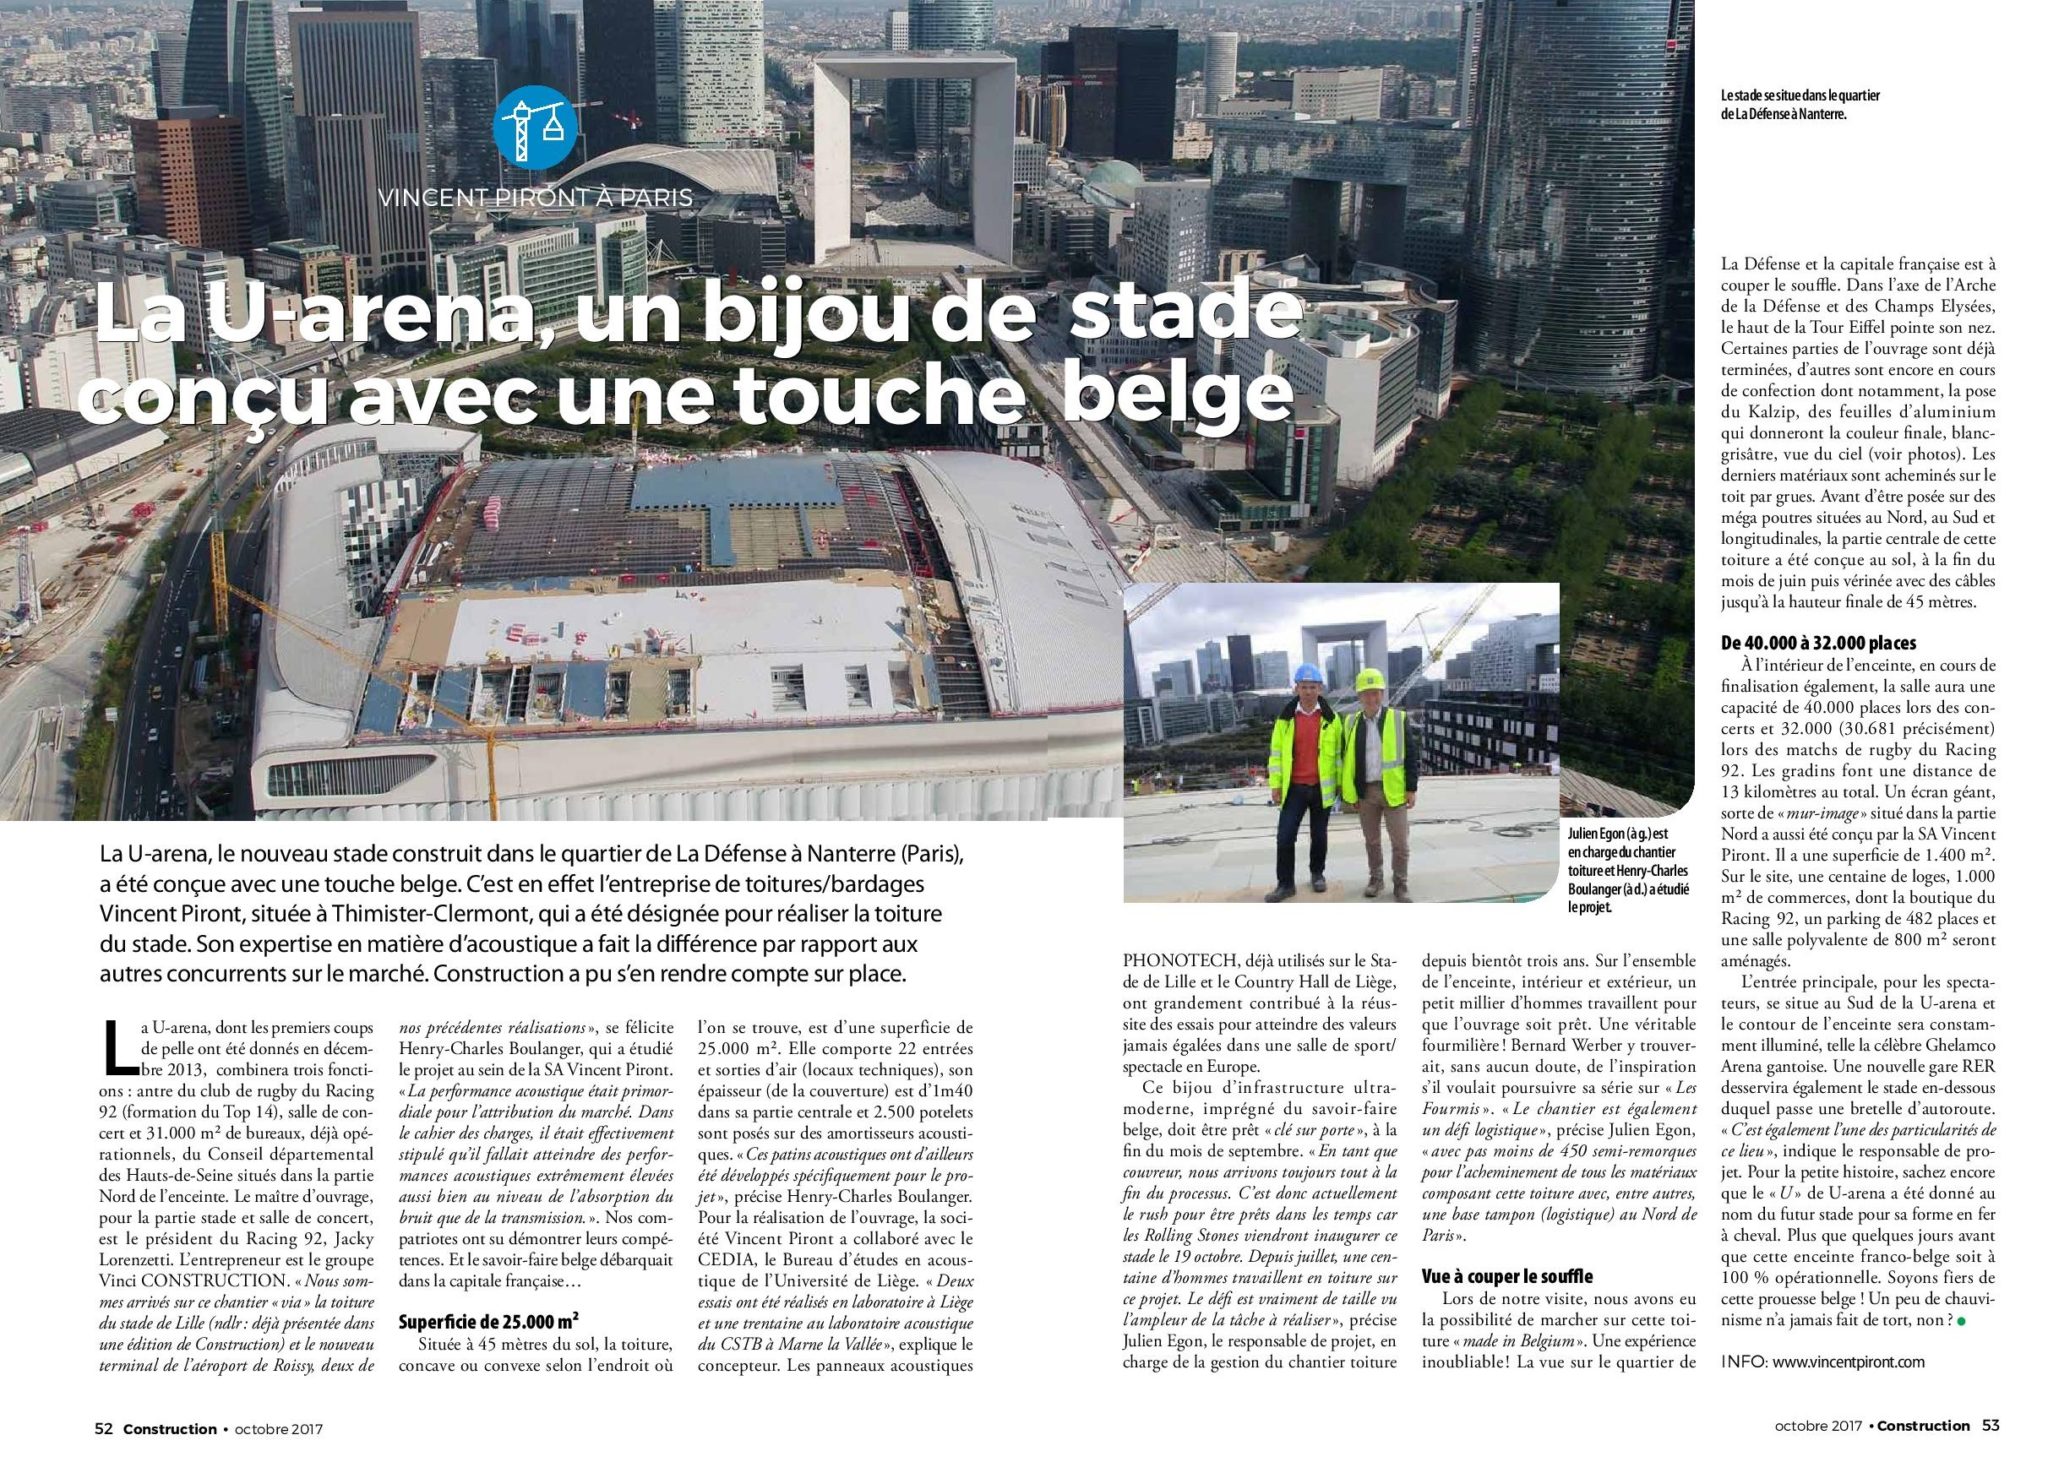 Realization of roofing and insulation U-ARENA Nanterre – Article Construction